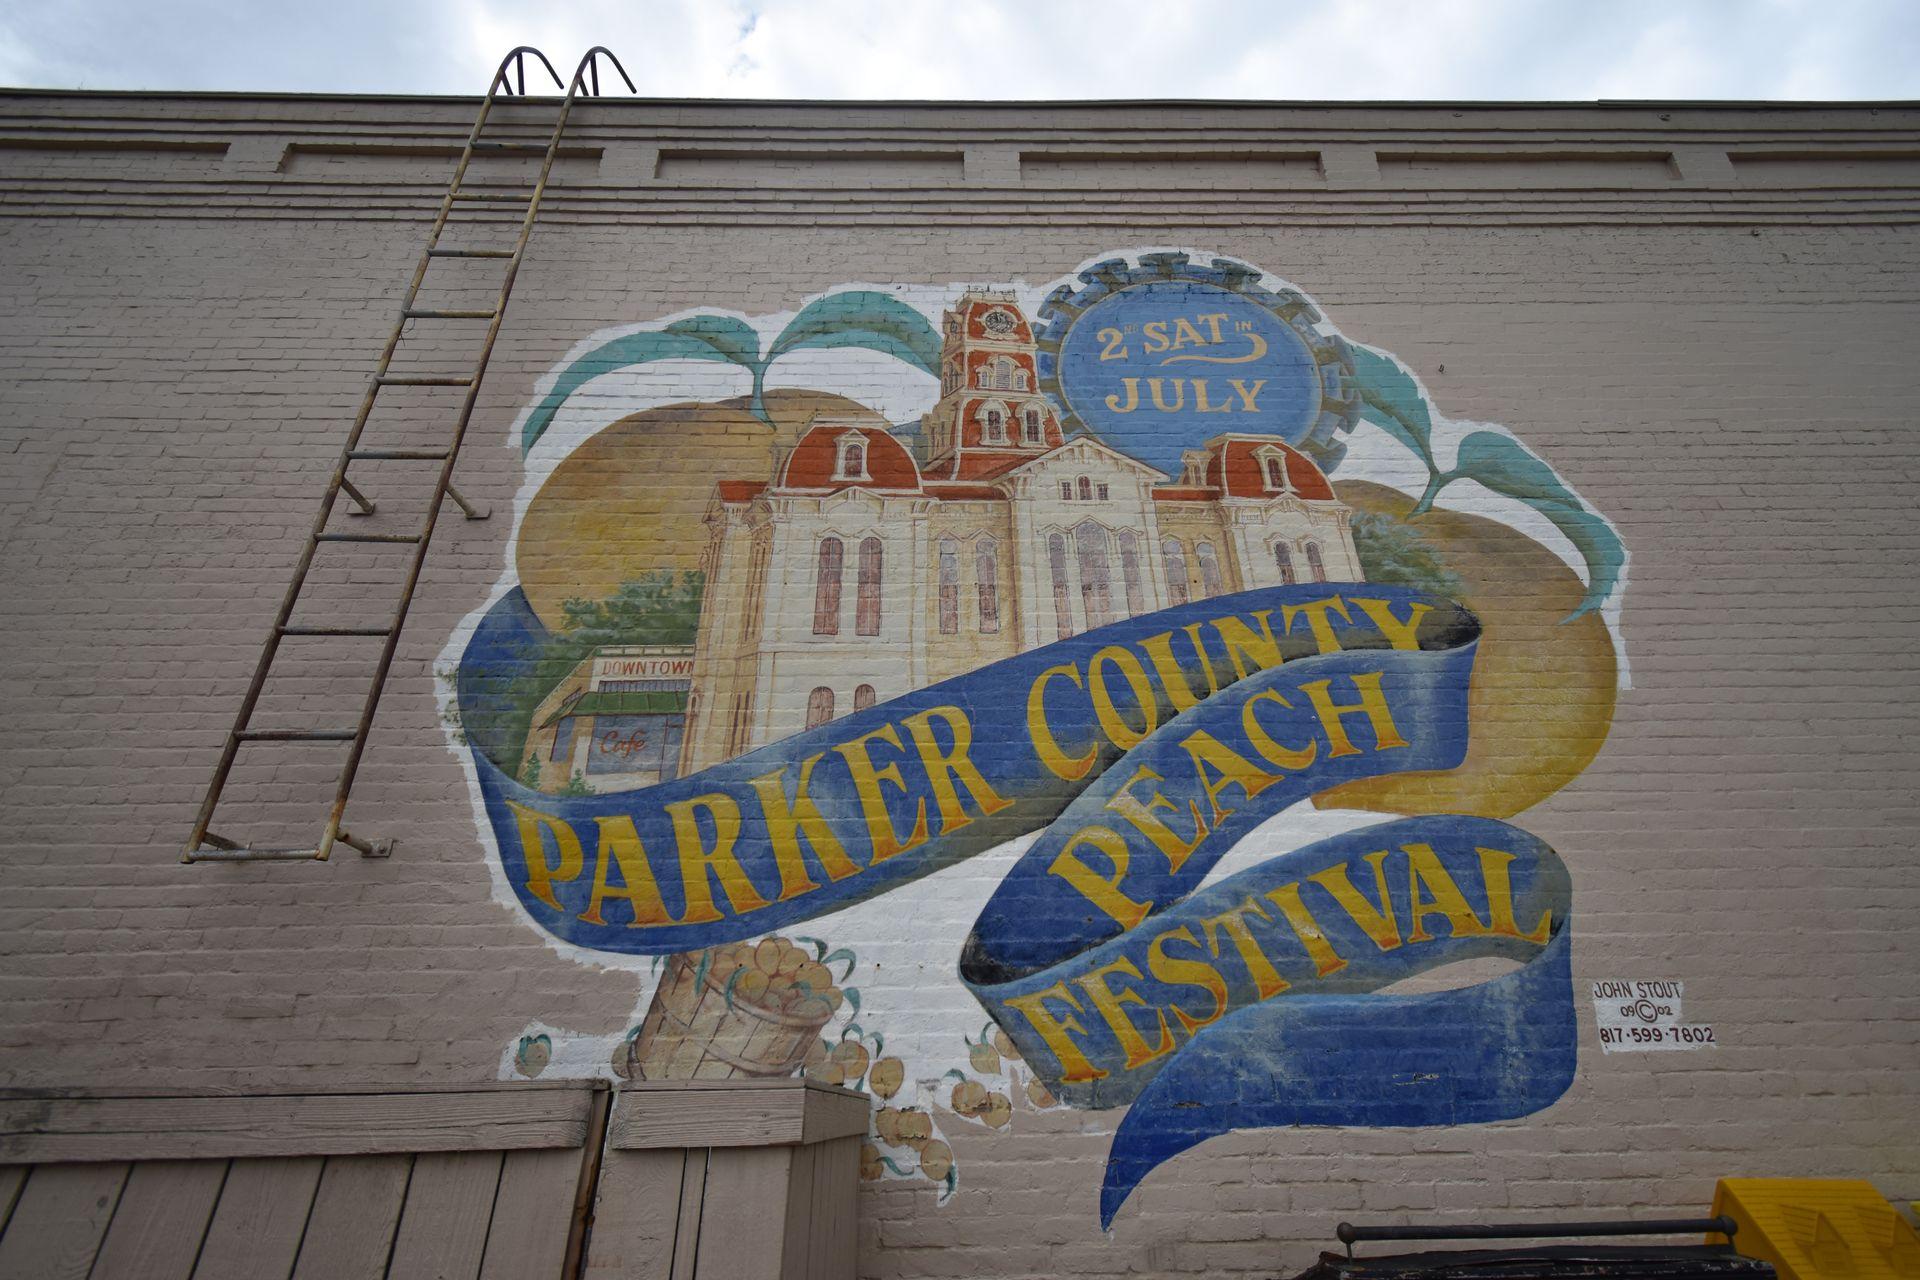 A mural for the Parker County Peach Festival in Weatherford.